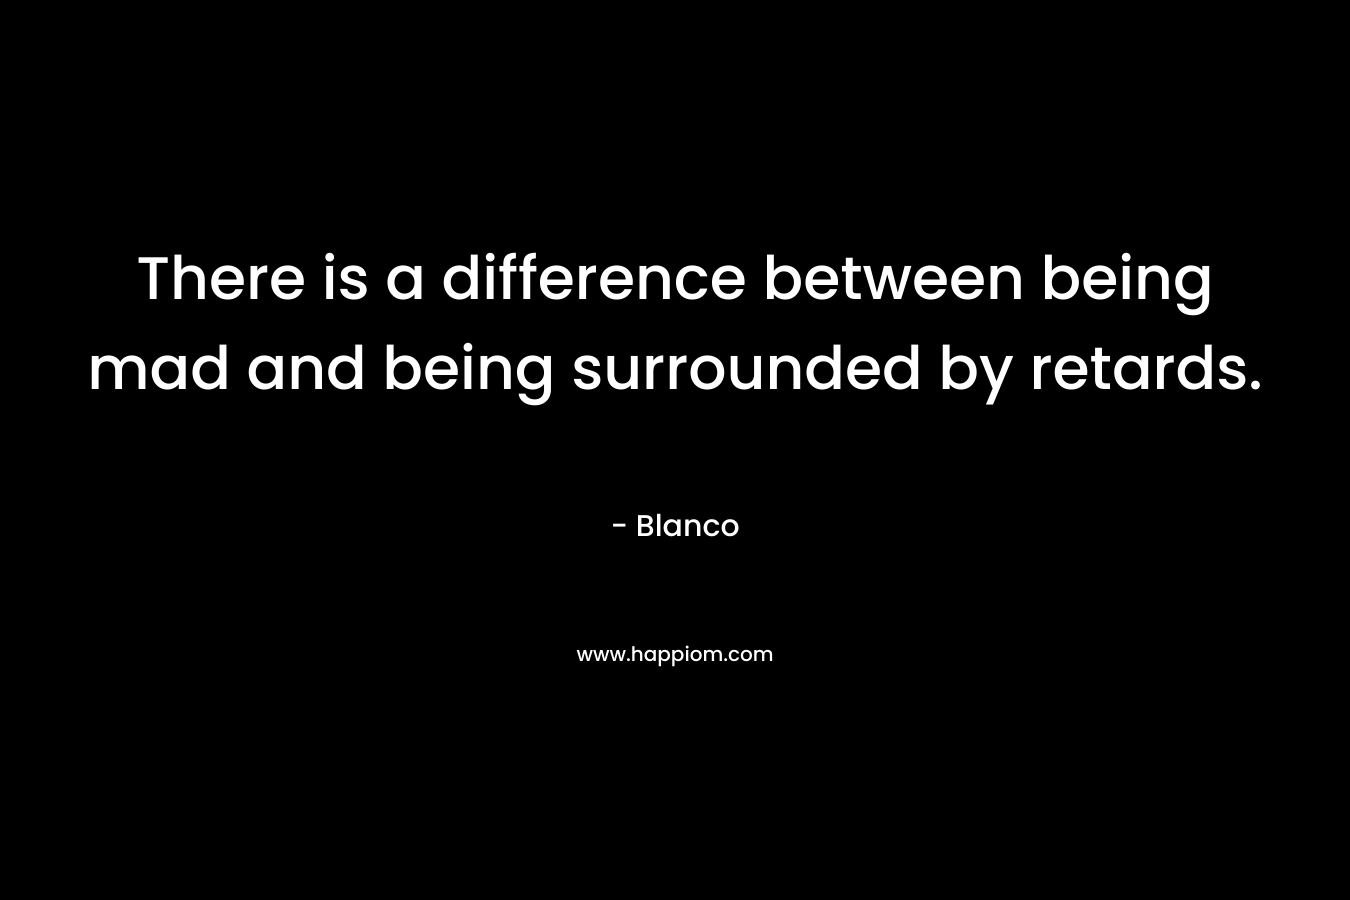 There is a difference between being mad and being surrounded by retards. – Blanco